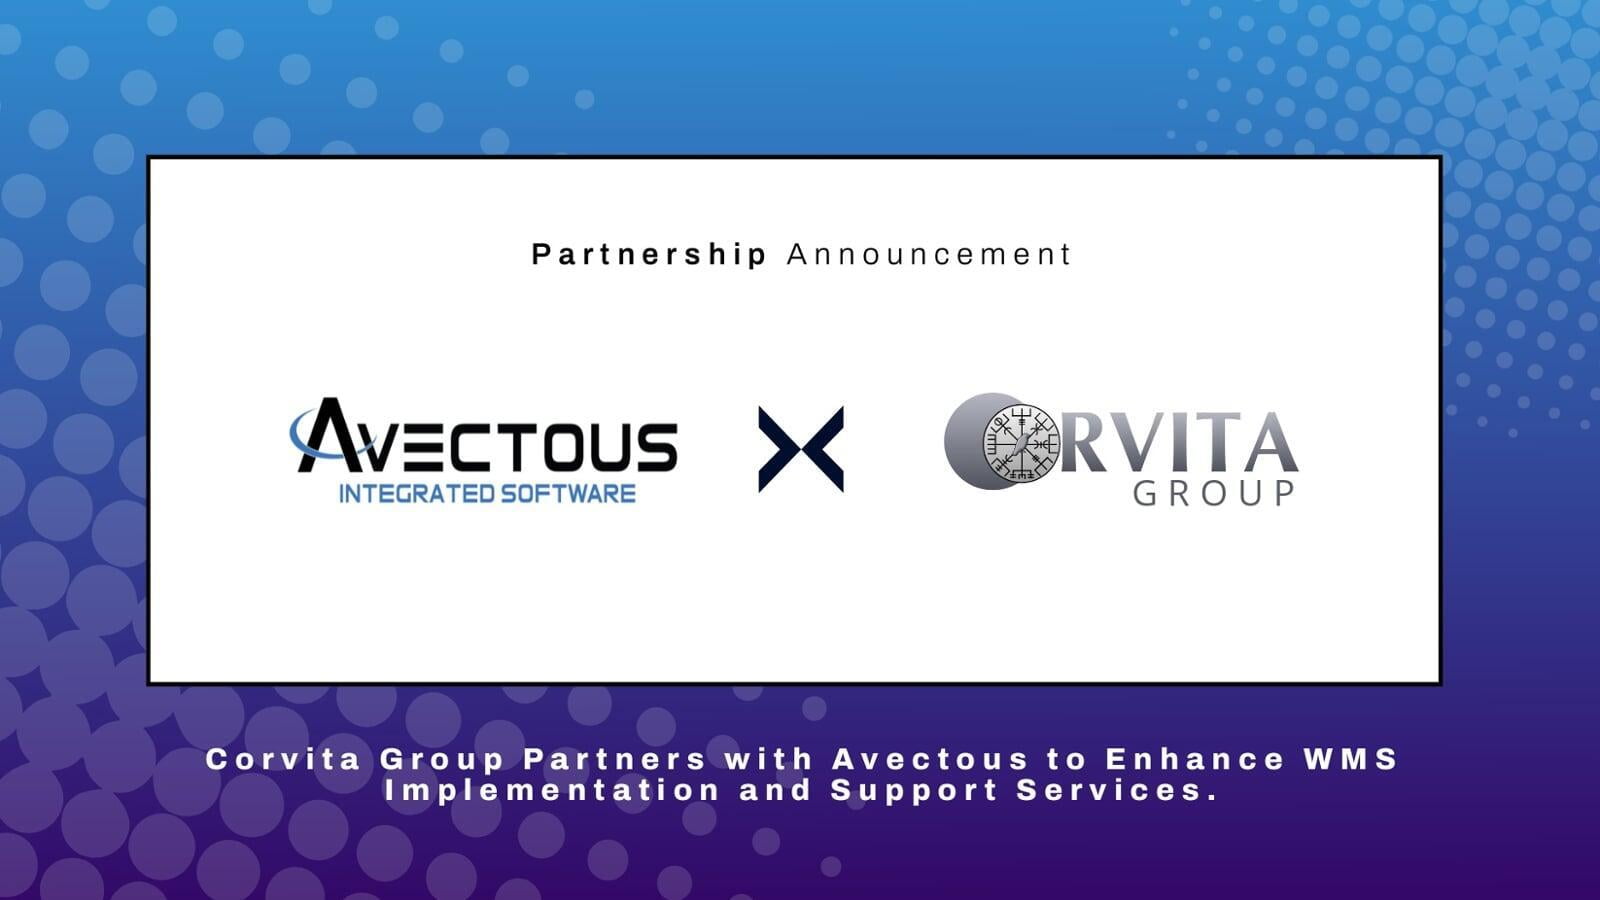 Corvita Group Partners with Avectous to Enhance WMS Implementation and Support Services